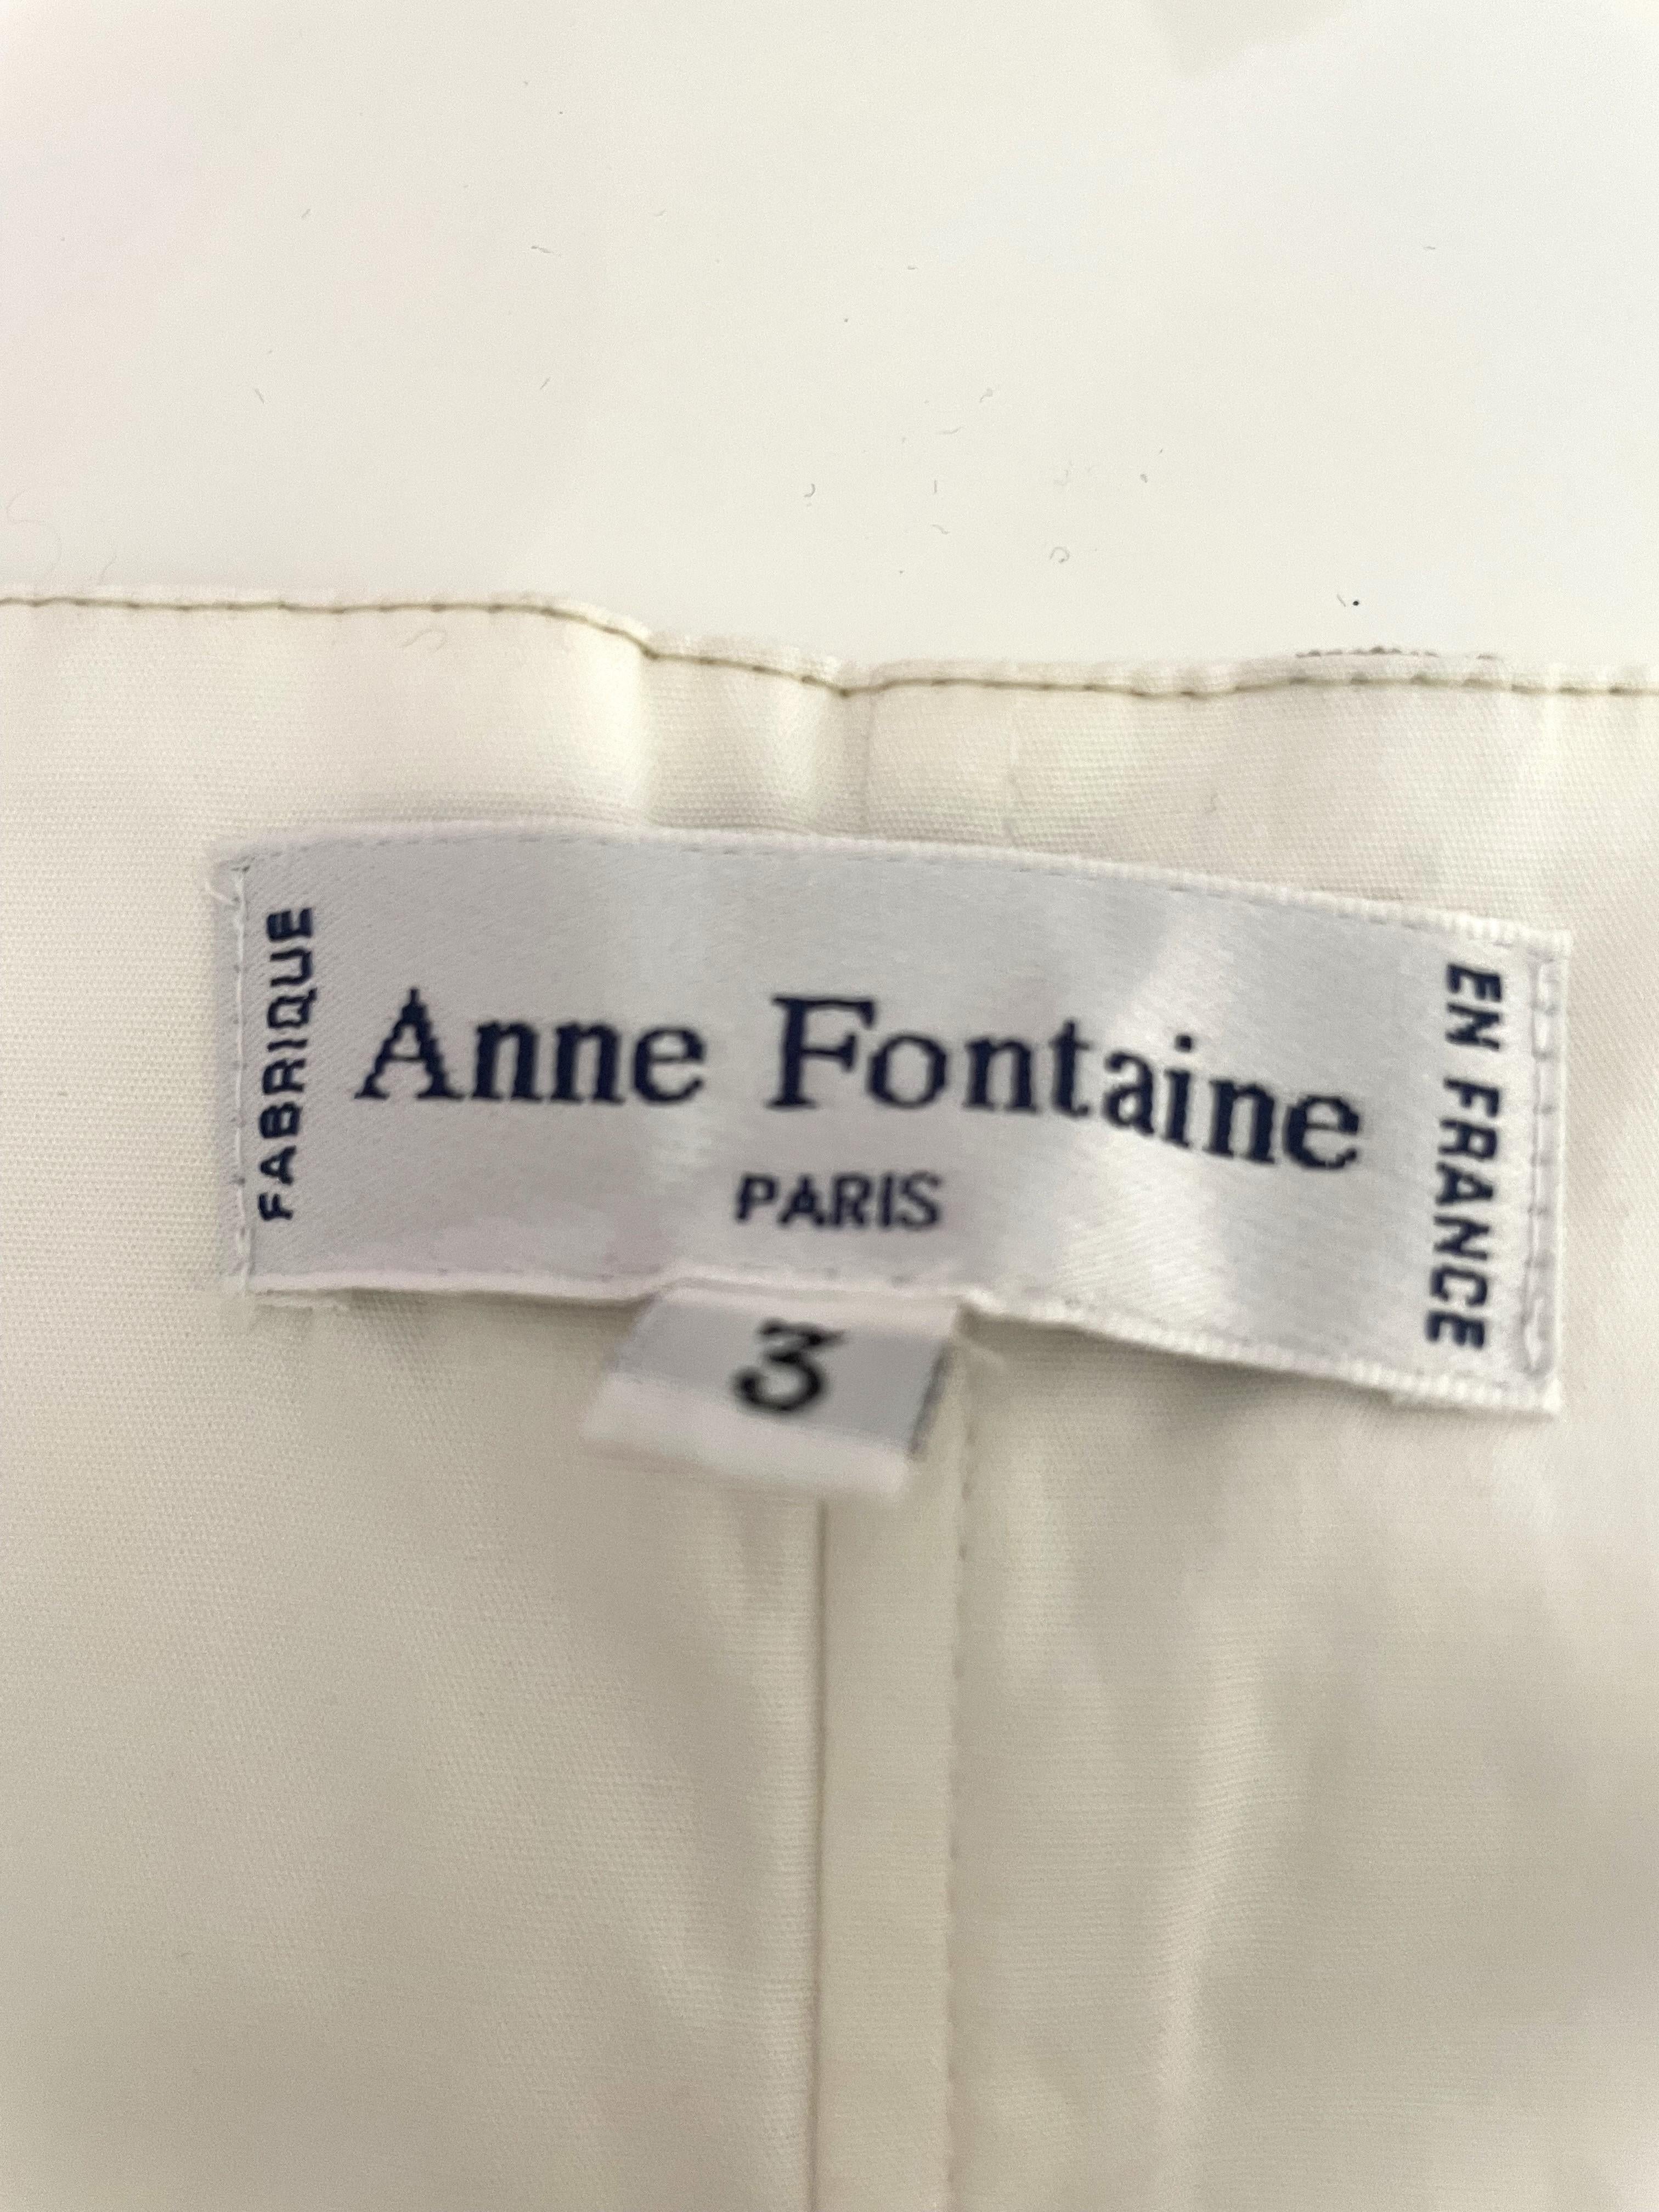 Anne Fontaine 90s Cotton Bandeau Top In Excellent Condition For Sale In 'S-HERTOGENBOSCH, NL